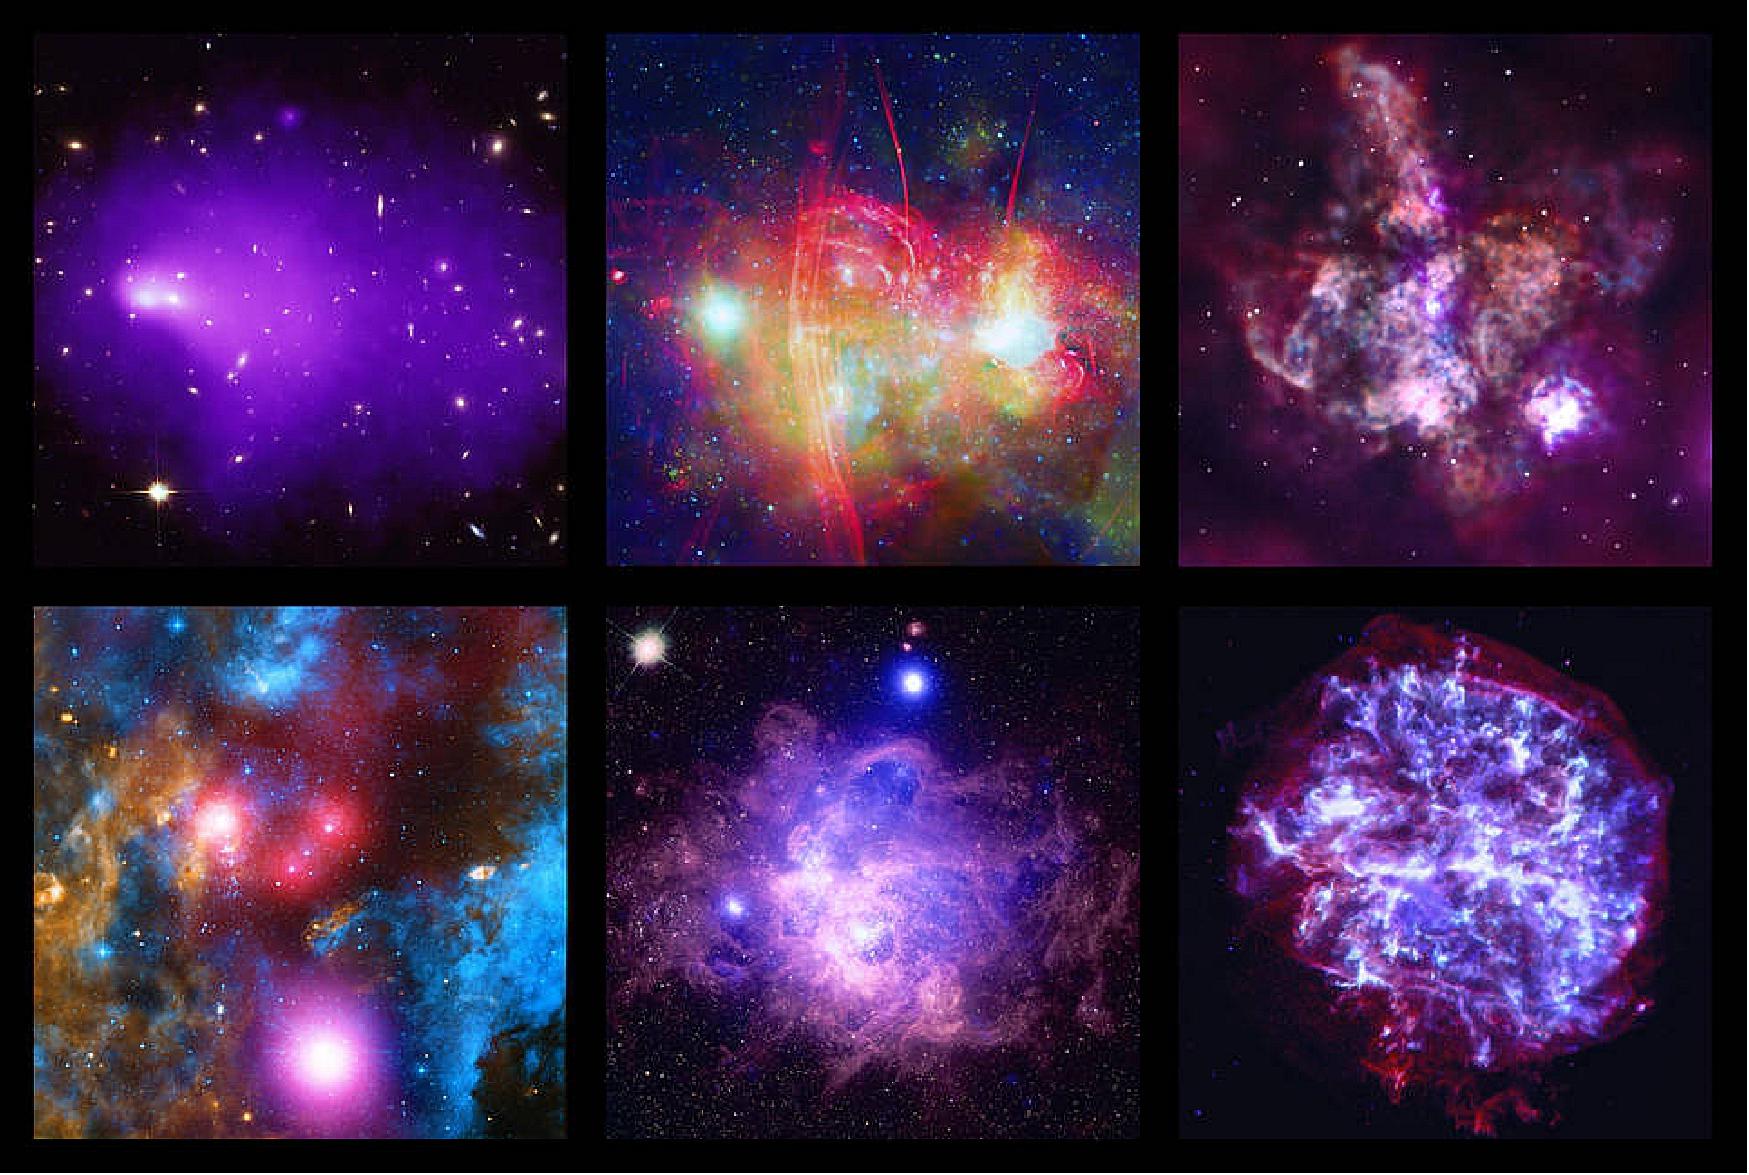 Figure 36: NASA’s Chandra X-ray Observatory is commemorating its 20th anniversary with an assembly of new images. These images represent the breadth of Chandra’s exploration, demonstrating the variety of objects it studies as well as how X-rays complement the data collected in other types of light (image credit: NASA/CXC)